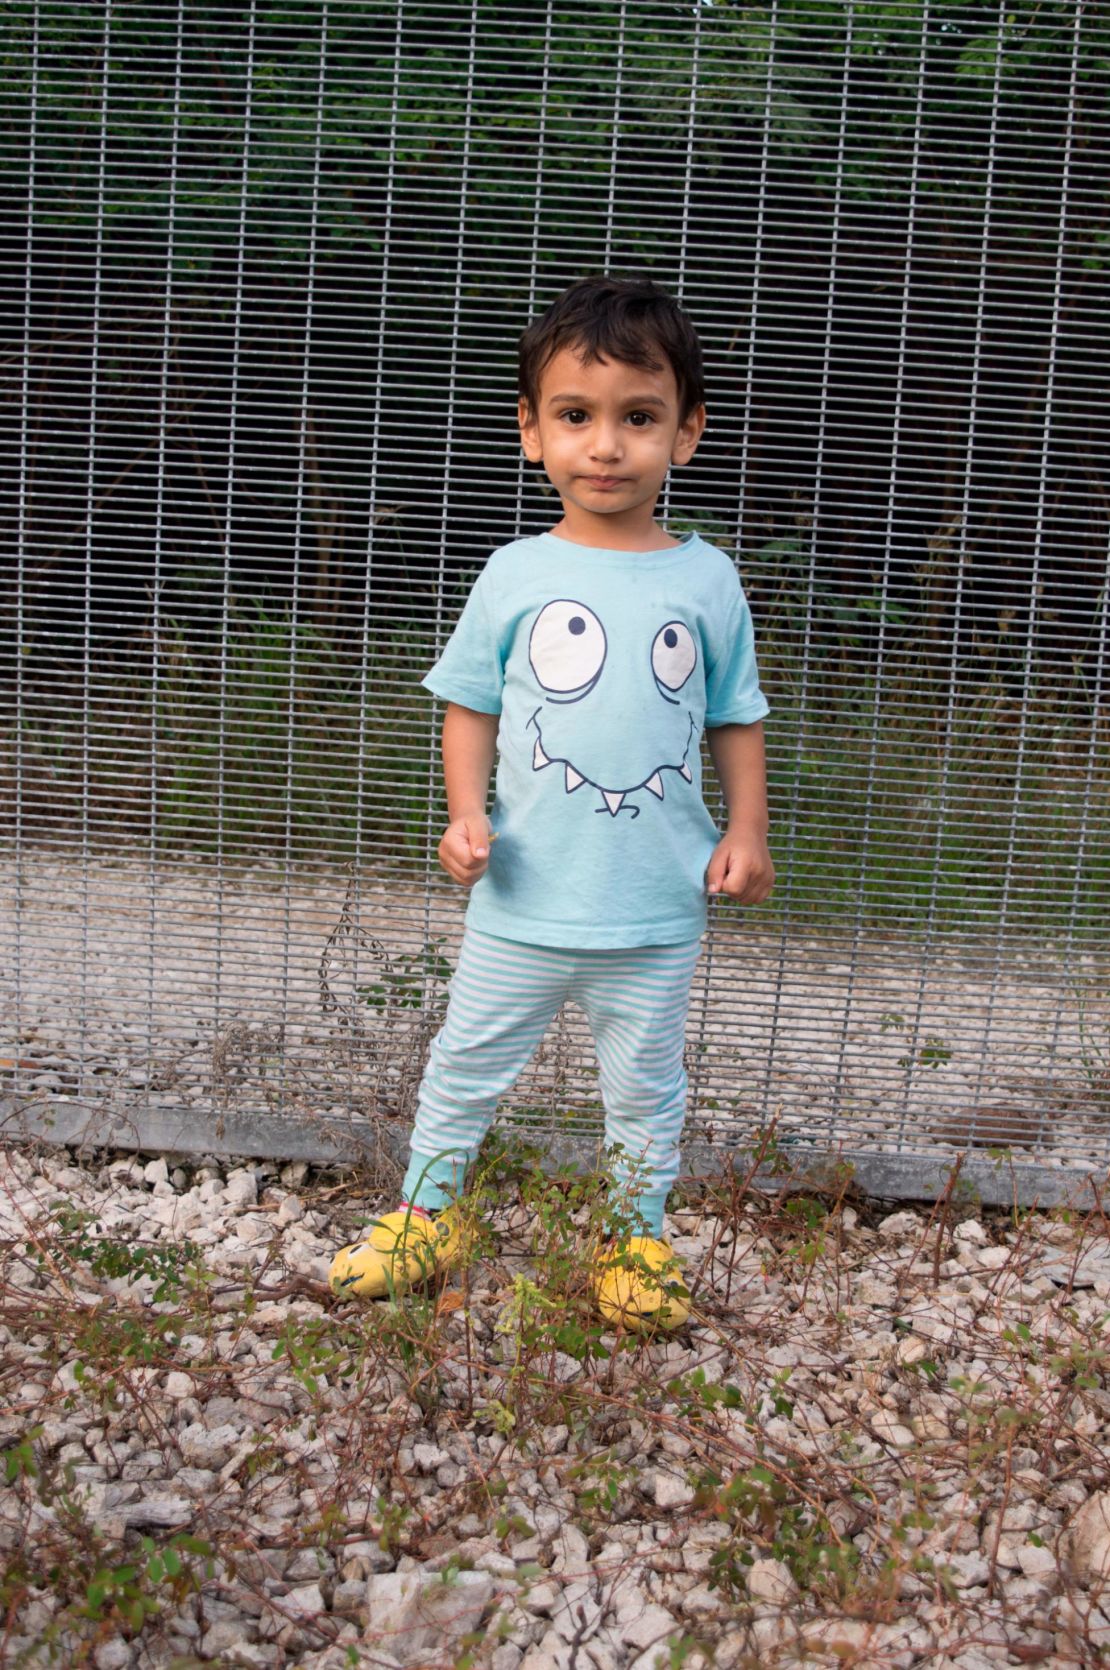 George, one of the child refugees on the island, was born in Nauru -- the family have been on the island for 5 years. 